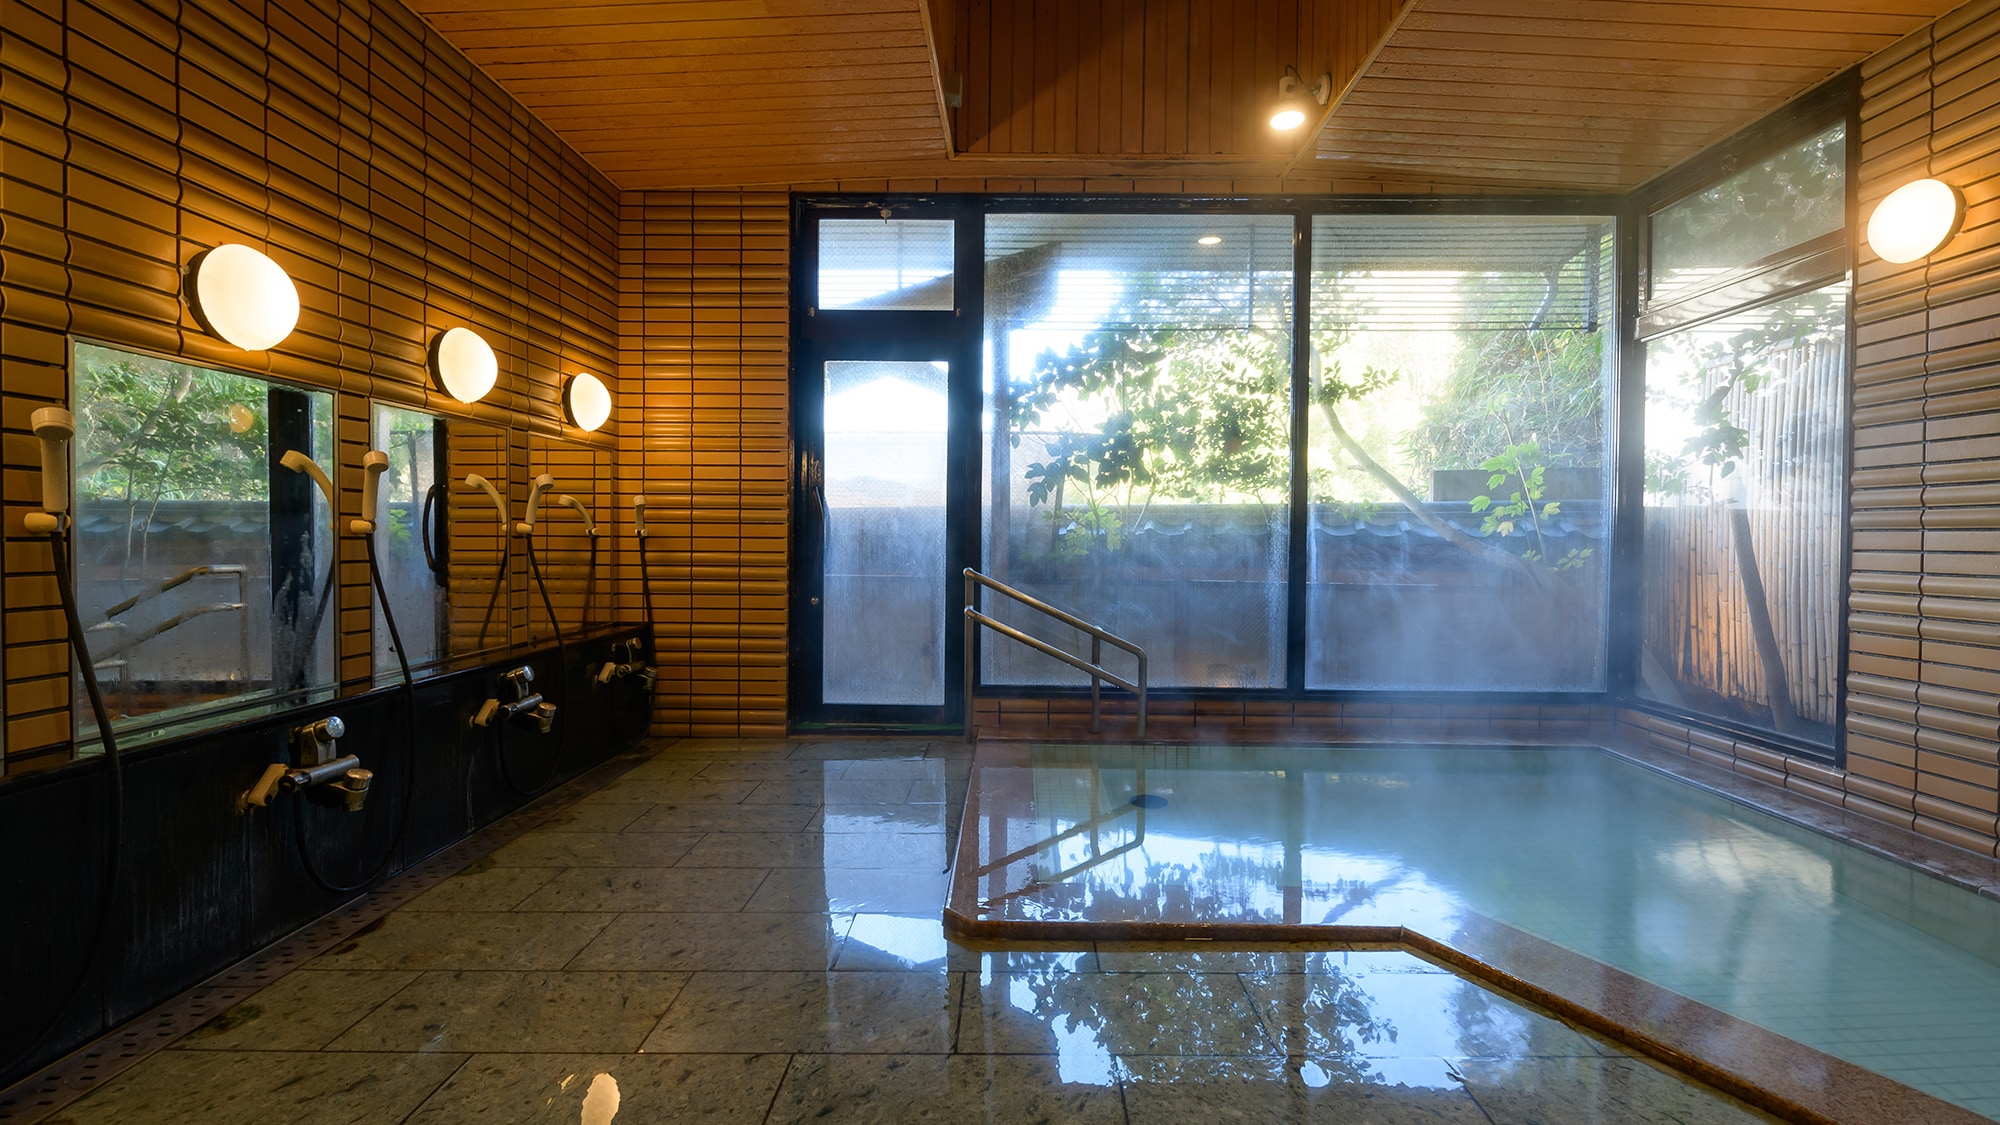 There are two indoor baths and two large communal baths.